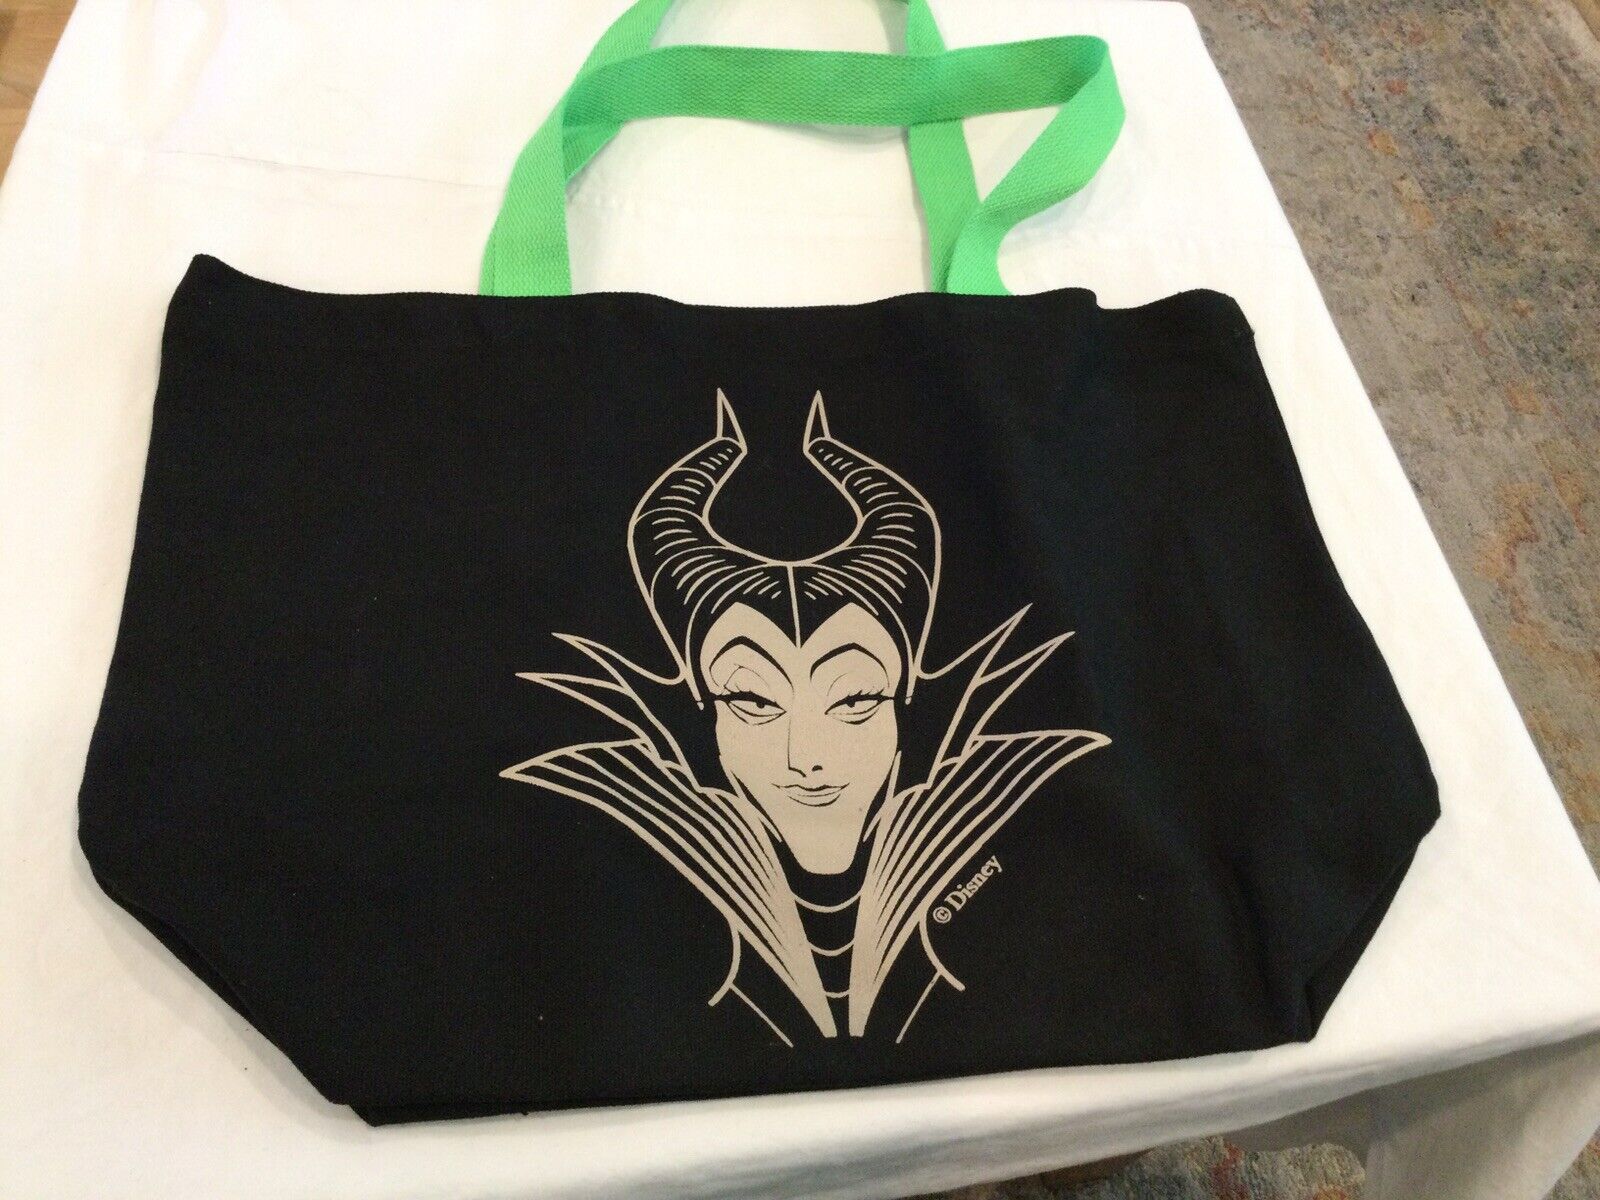 Disney Villains: Made for Mayhem Canvas Maleficent Tote By Besame Cosmetics 2022